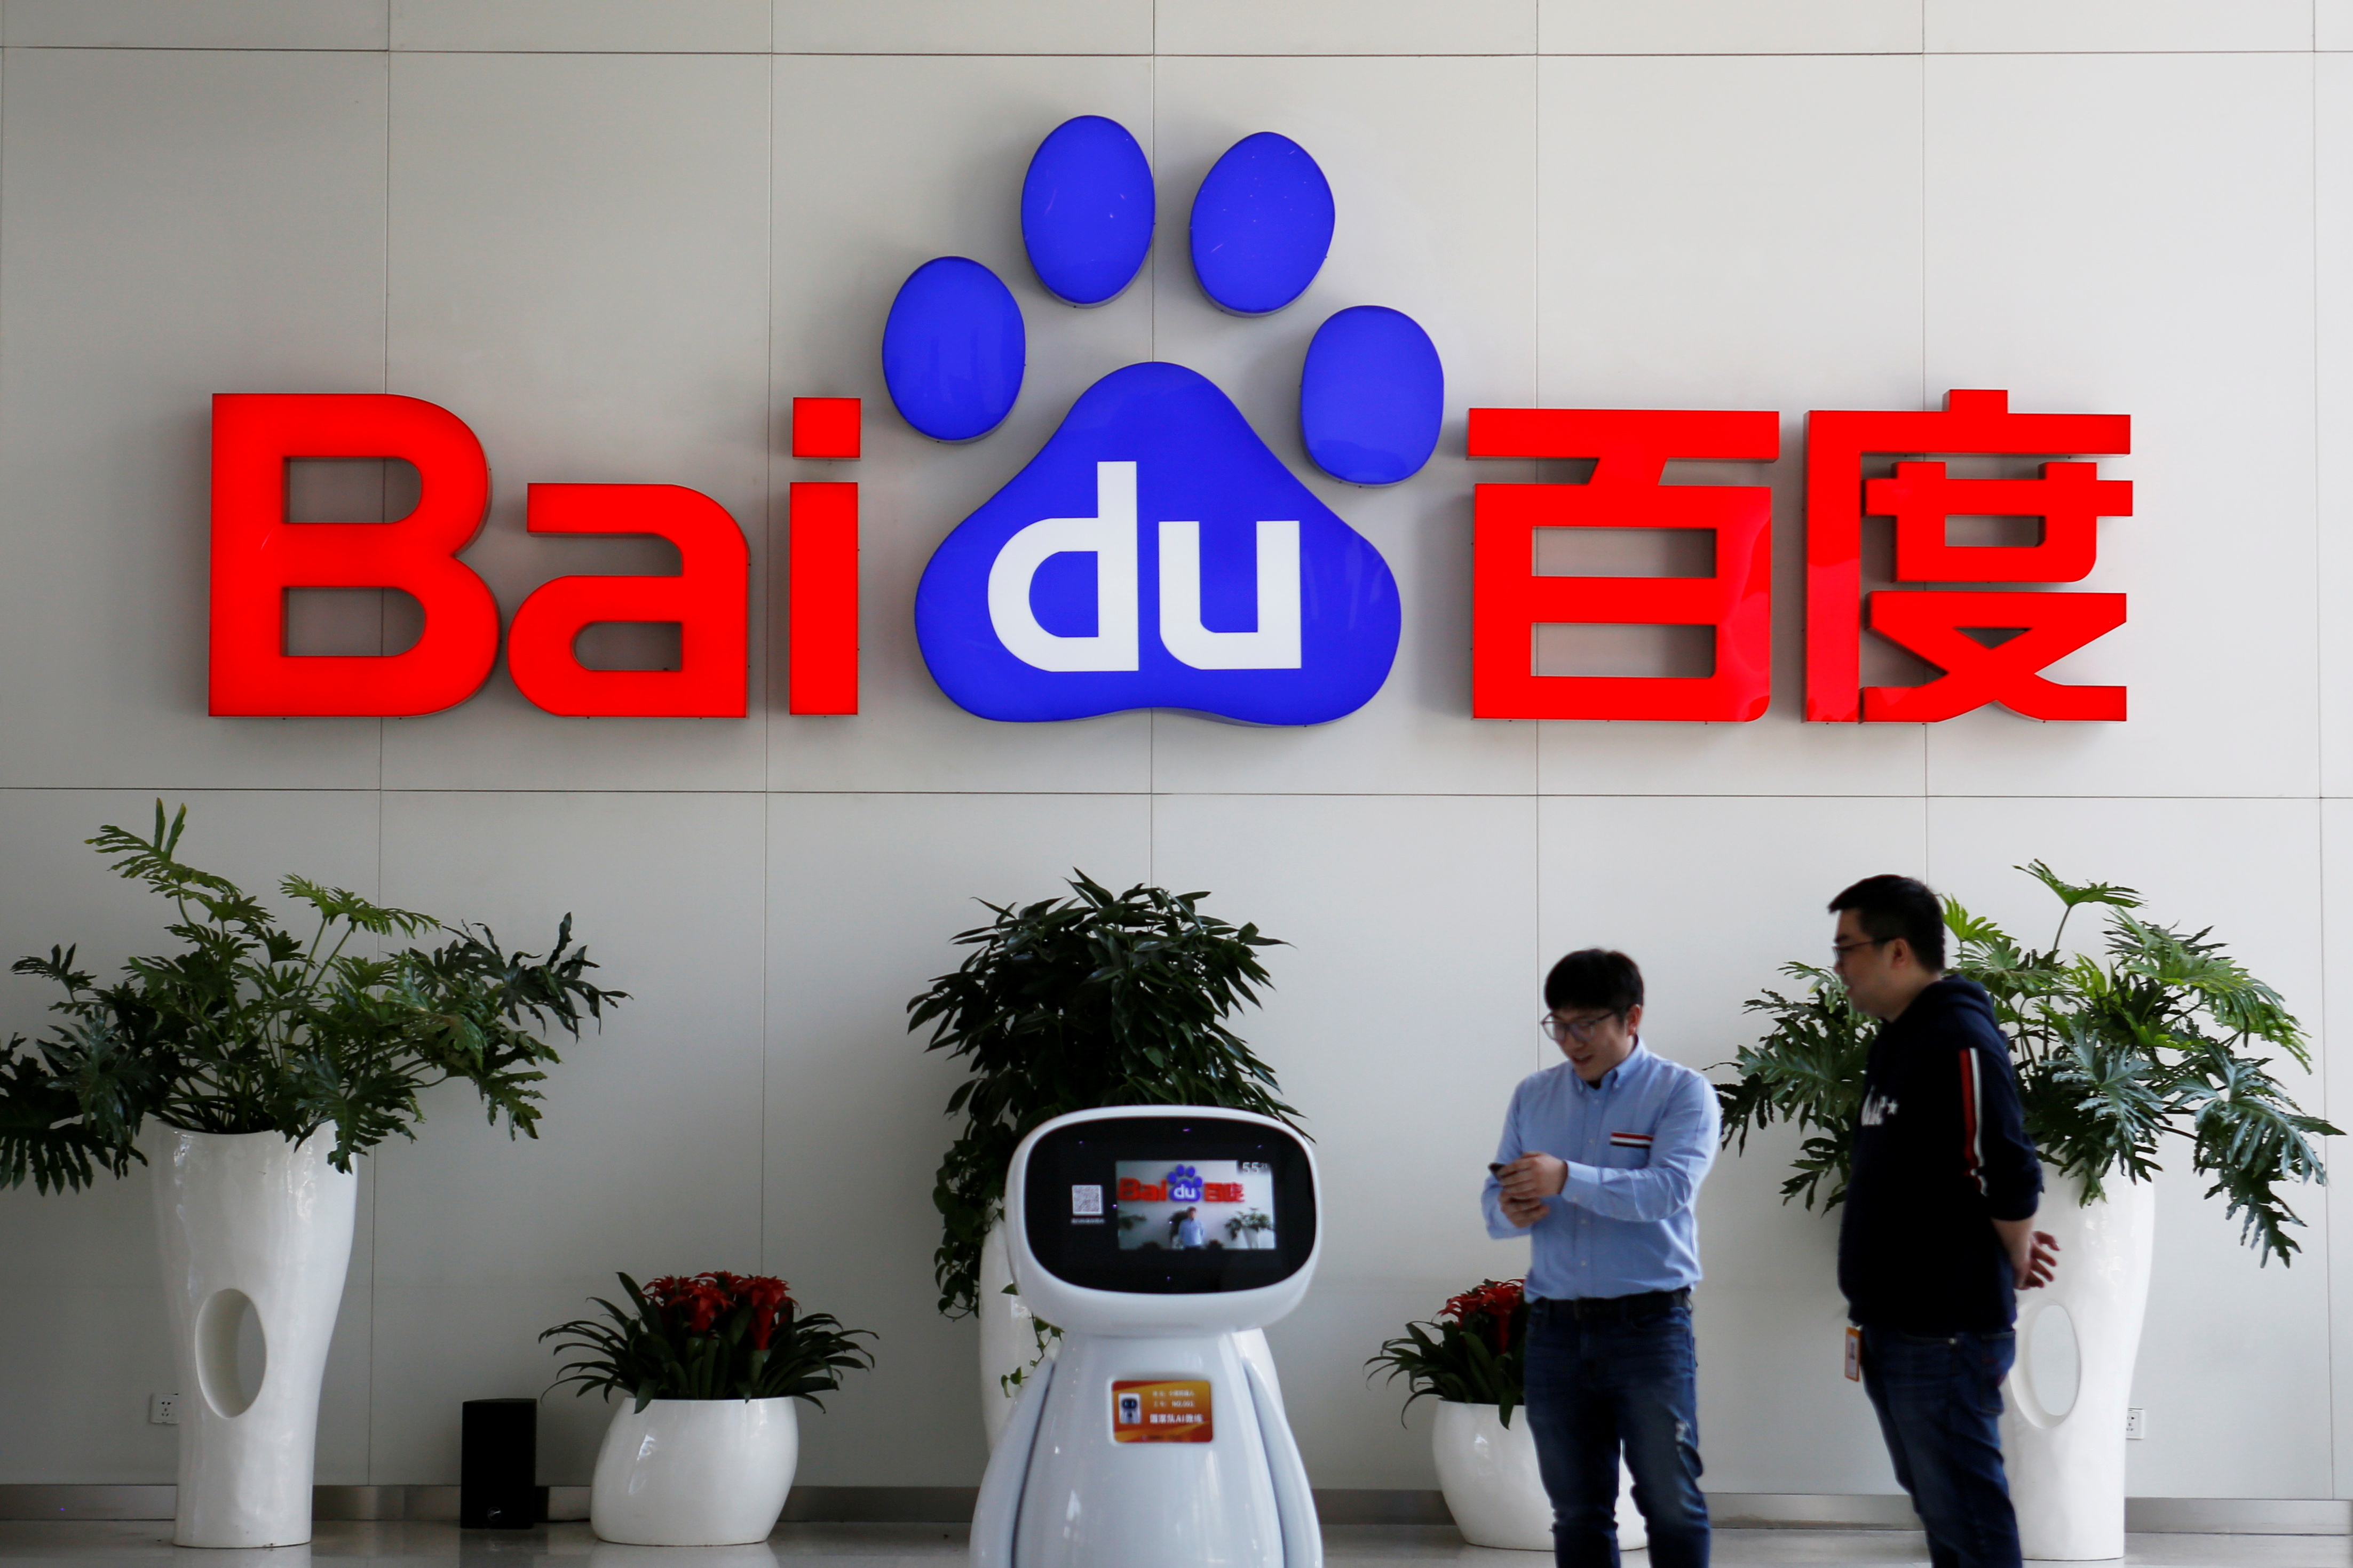 FILE PHOTO: Men interact with a Baidu AI robot near the company logo at its headquarters in Beijing, China April 23, 2021. REUTERS/Florence Lo/File Photo